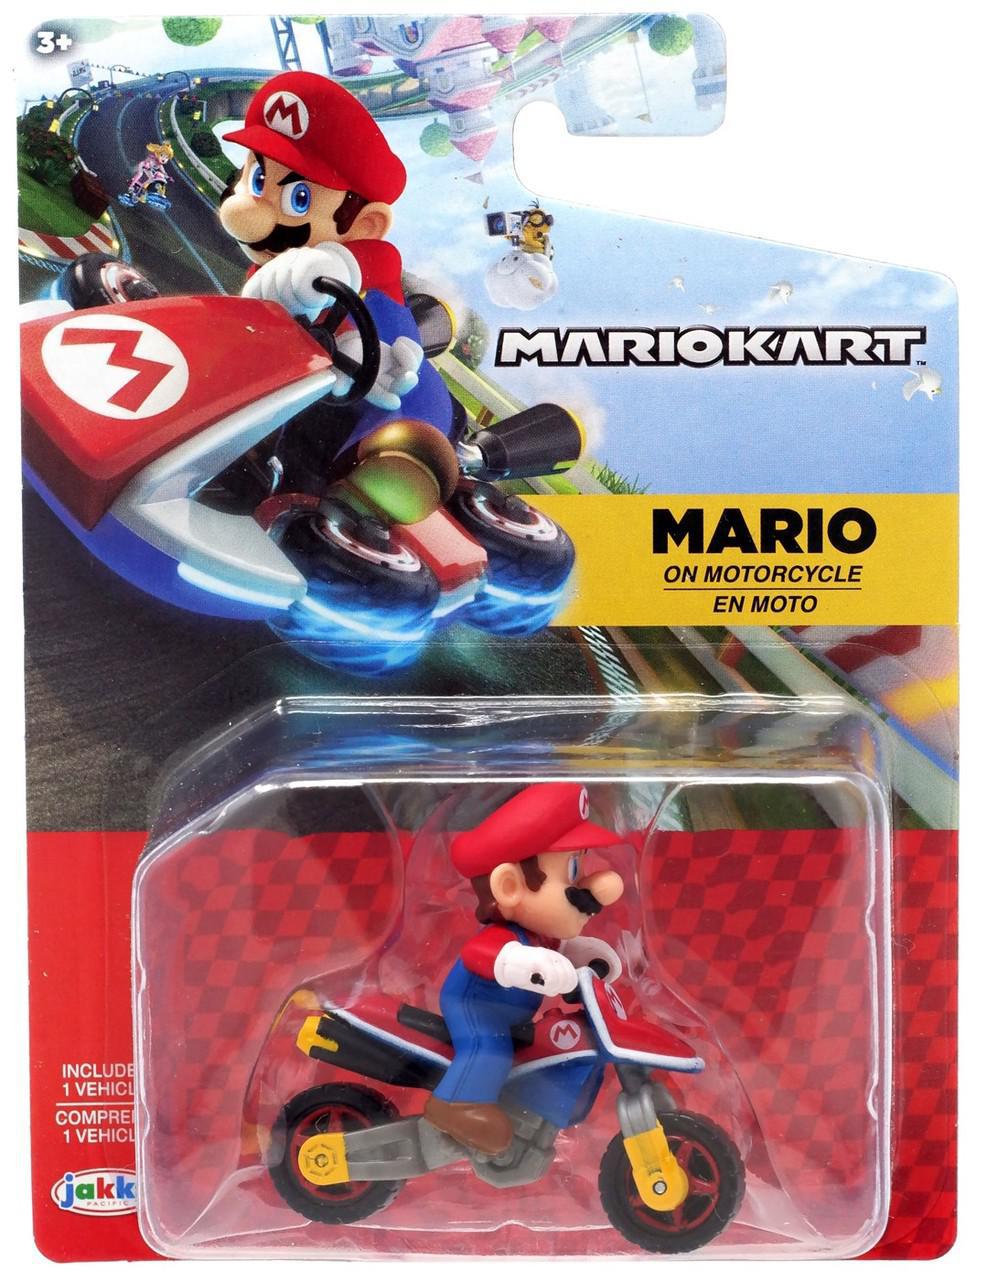 World of Nintendo Super Mario Kart Wave 4 Tape Racers Vehicles Only -  Feature Luigi, Shy Guy, Yoshi and Mario Figure (2.5 inches)